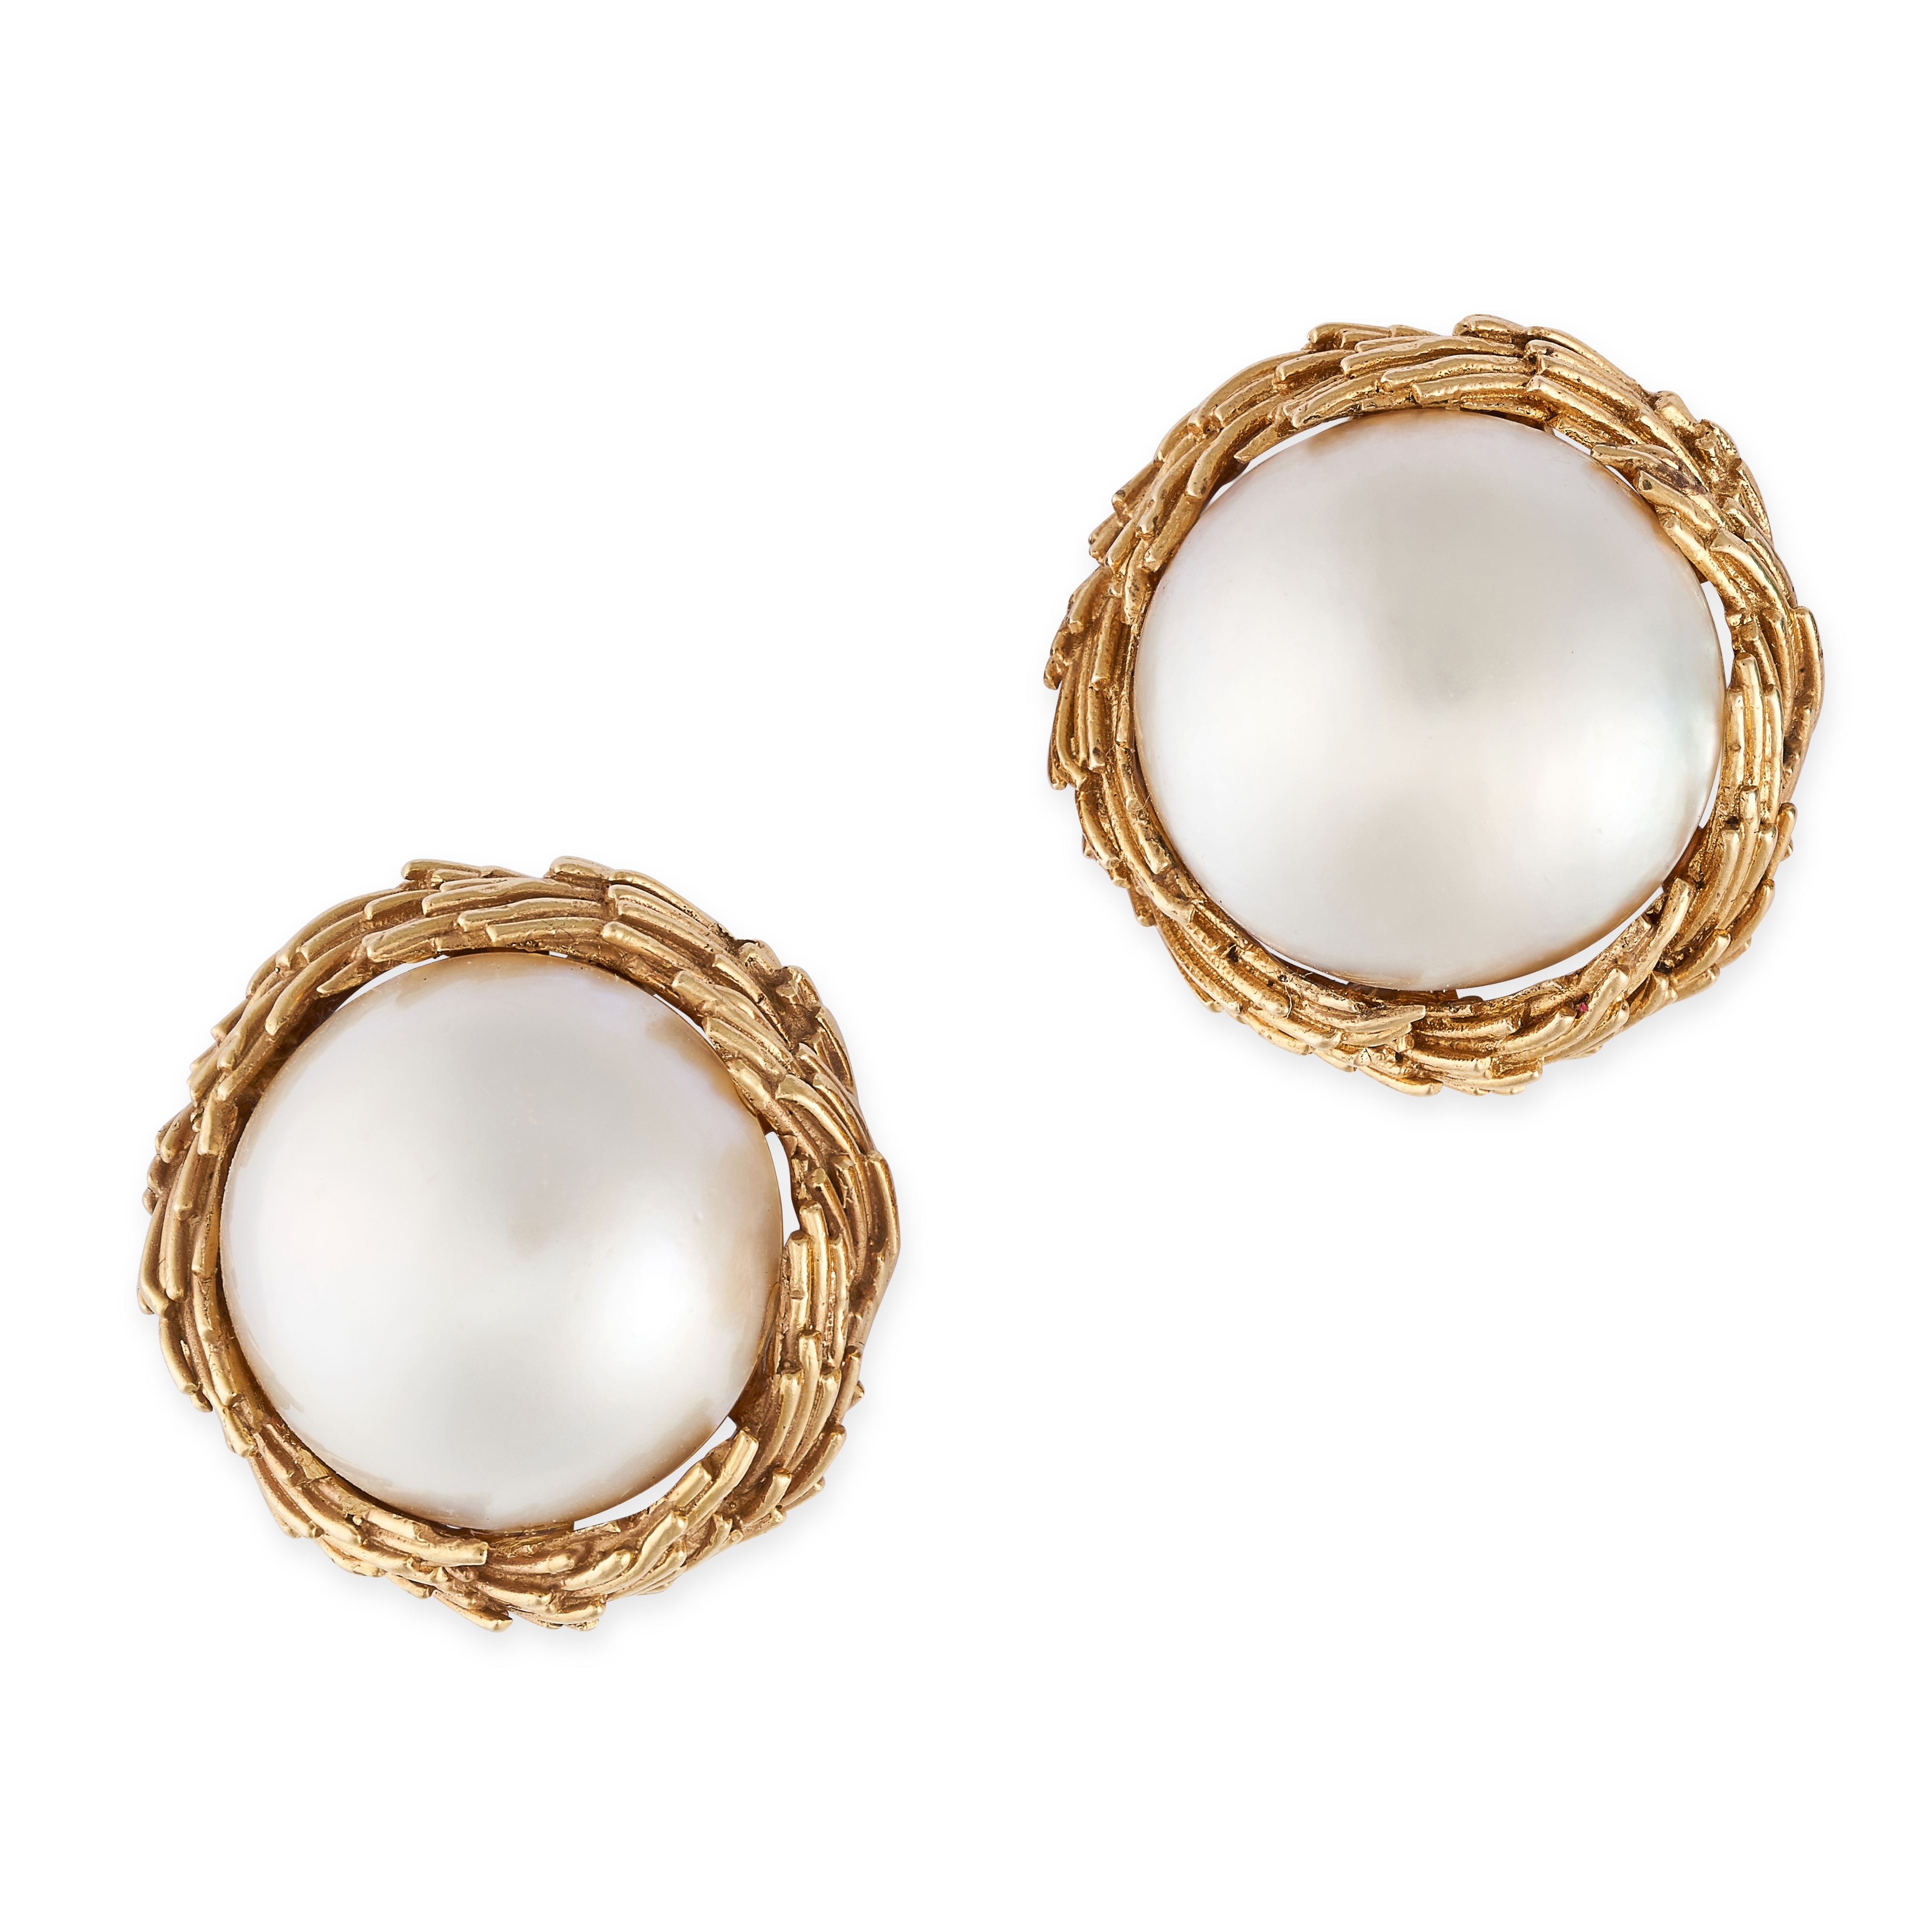 C'EST LAUDIER, A PAIR OF VINTAGE PEARL EARRINGS  Clip fittings  Mabe pearls  Stamped 750  Length